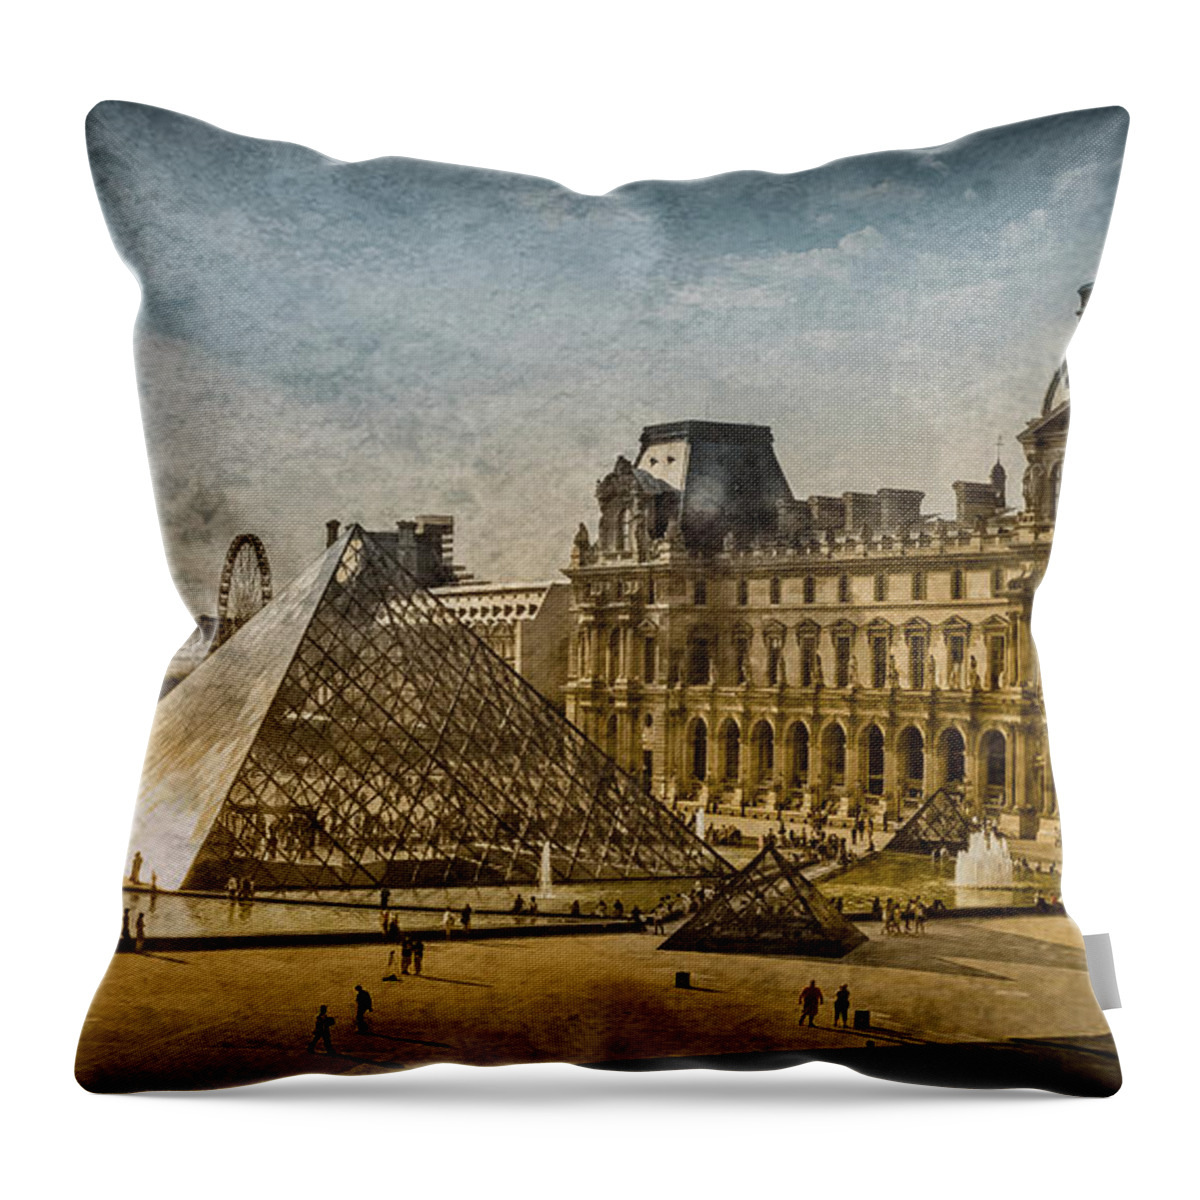 France Throw Pillow featuring the photograph Paris, France - Pyramide by Mark Forte